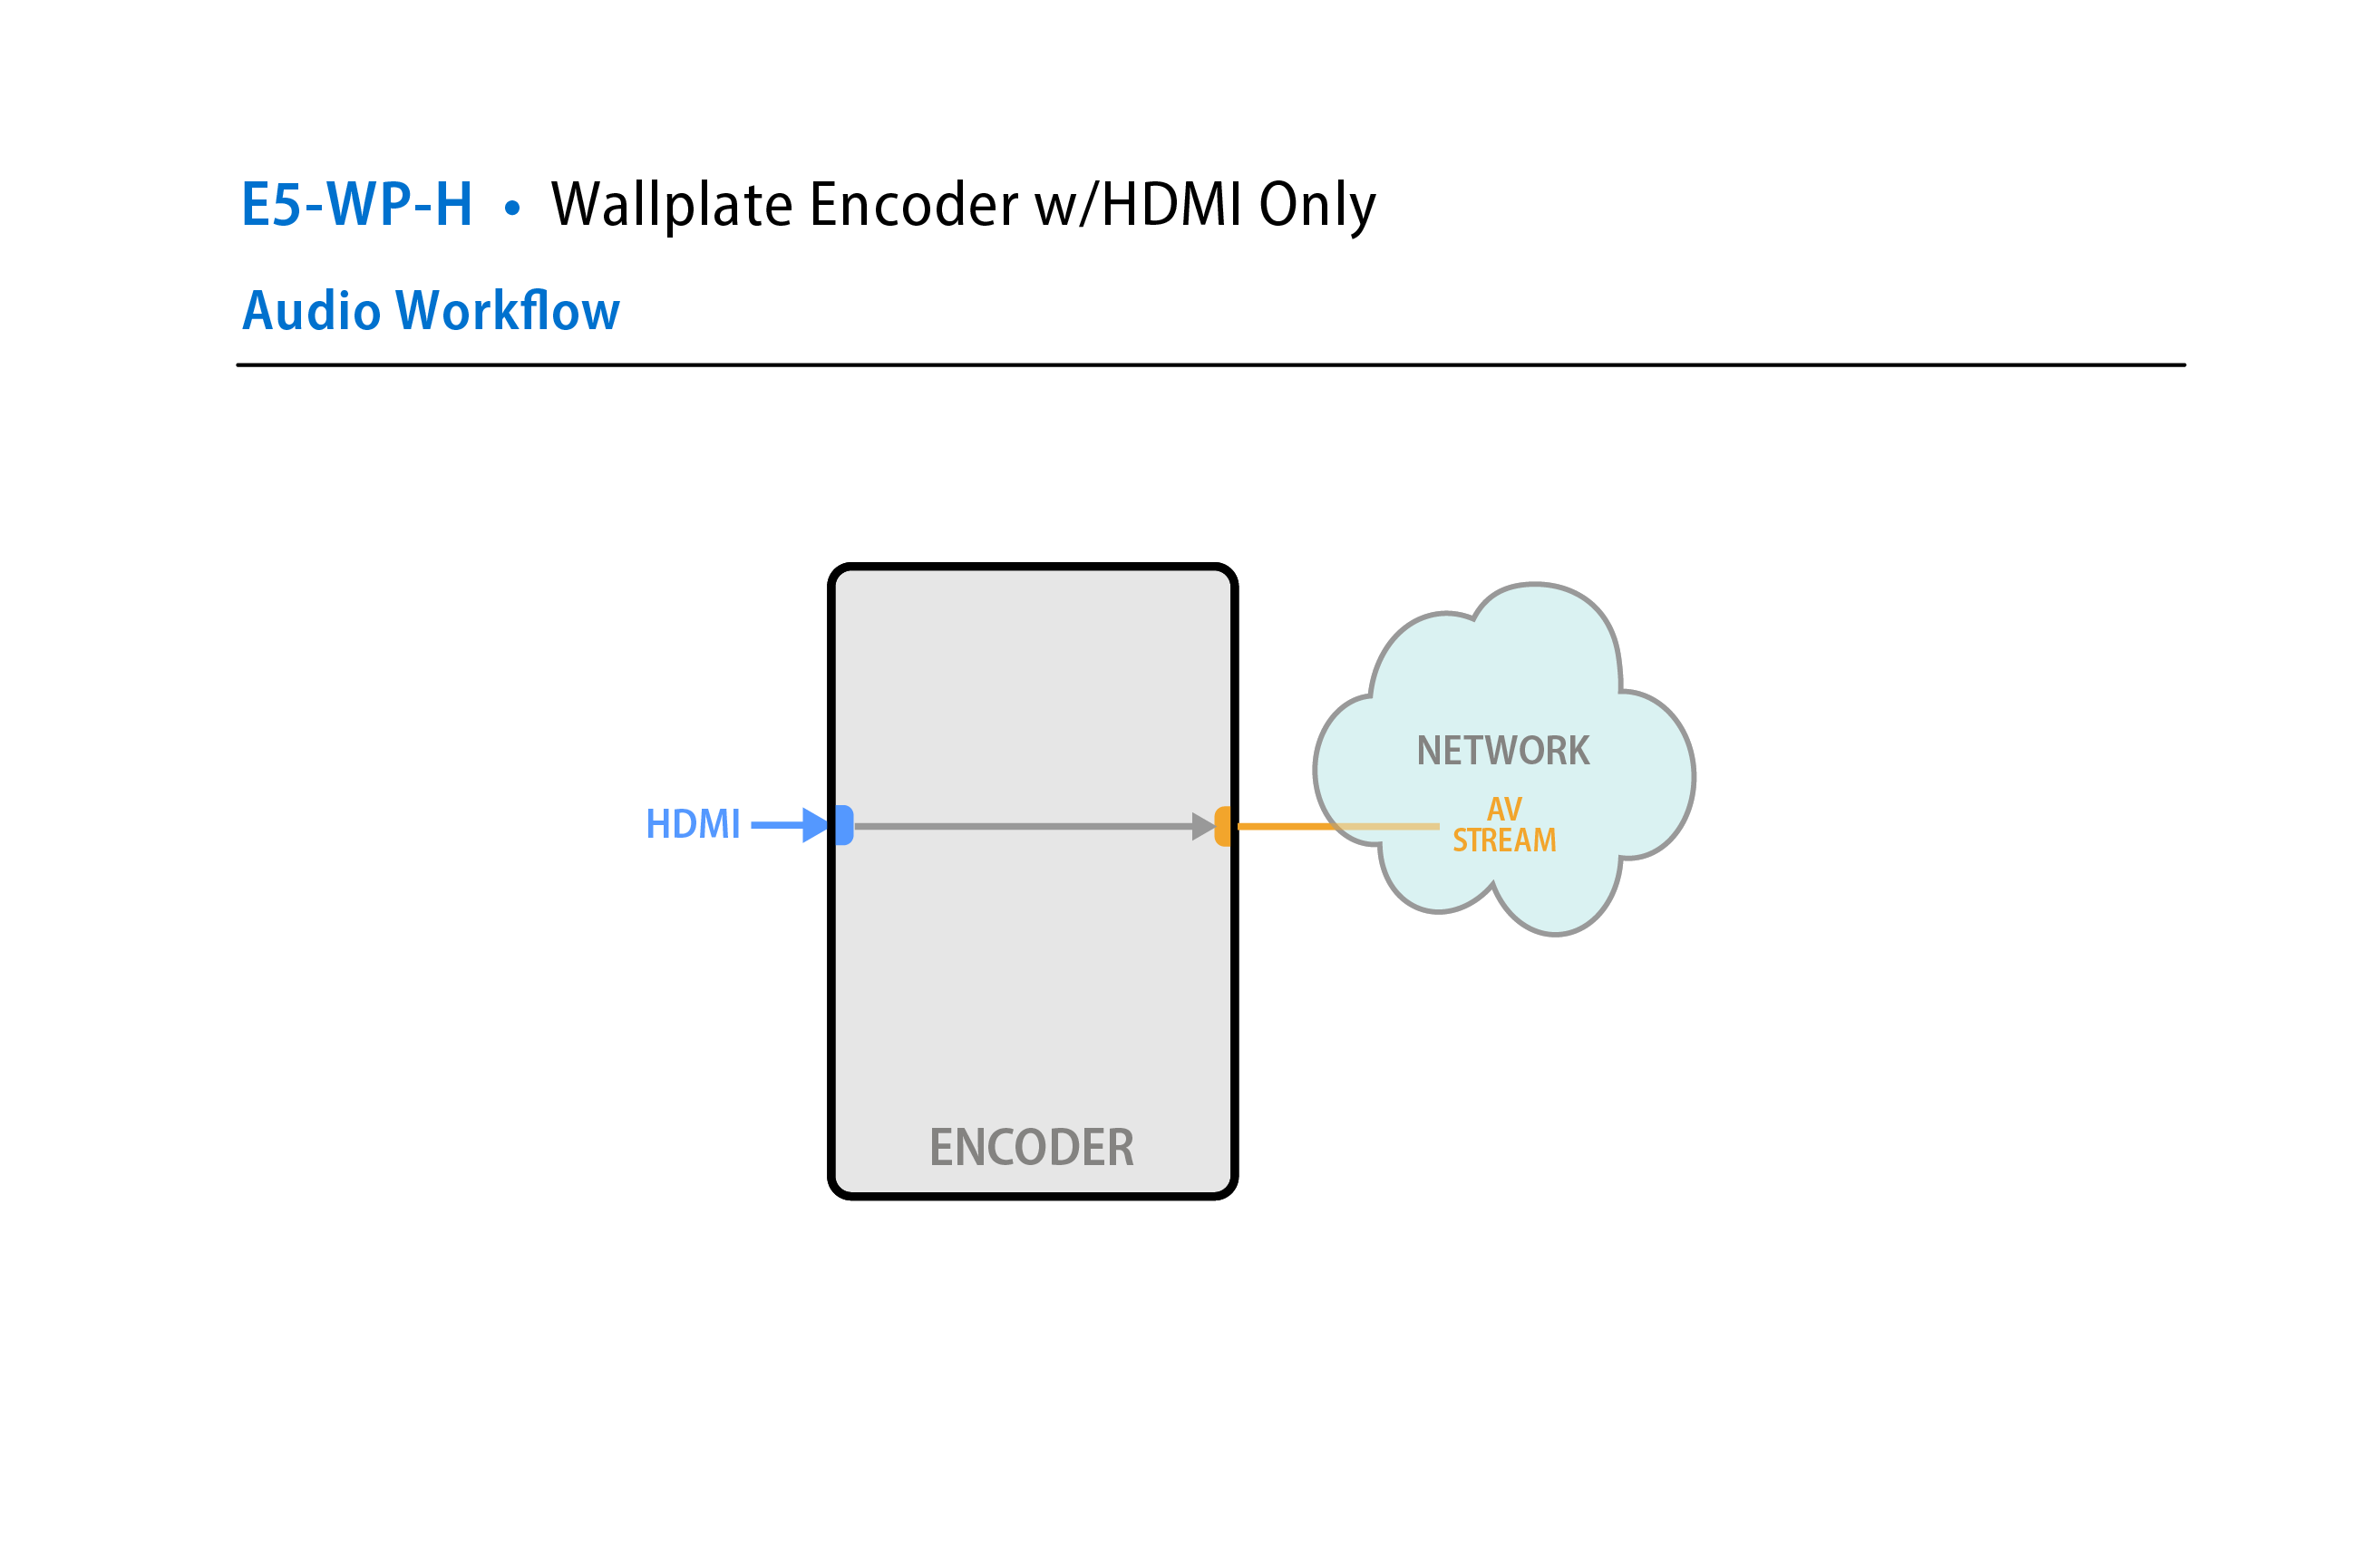 E5-WP-H Workflow